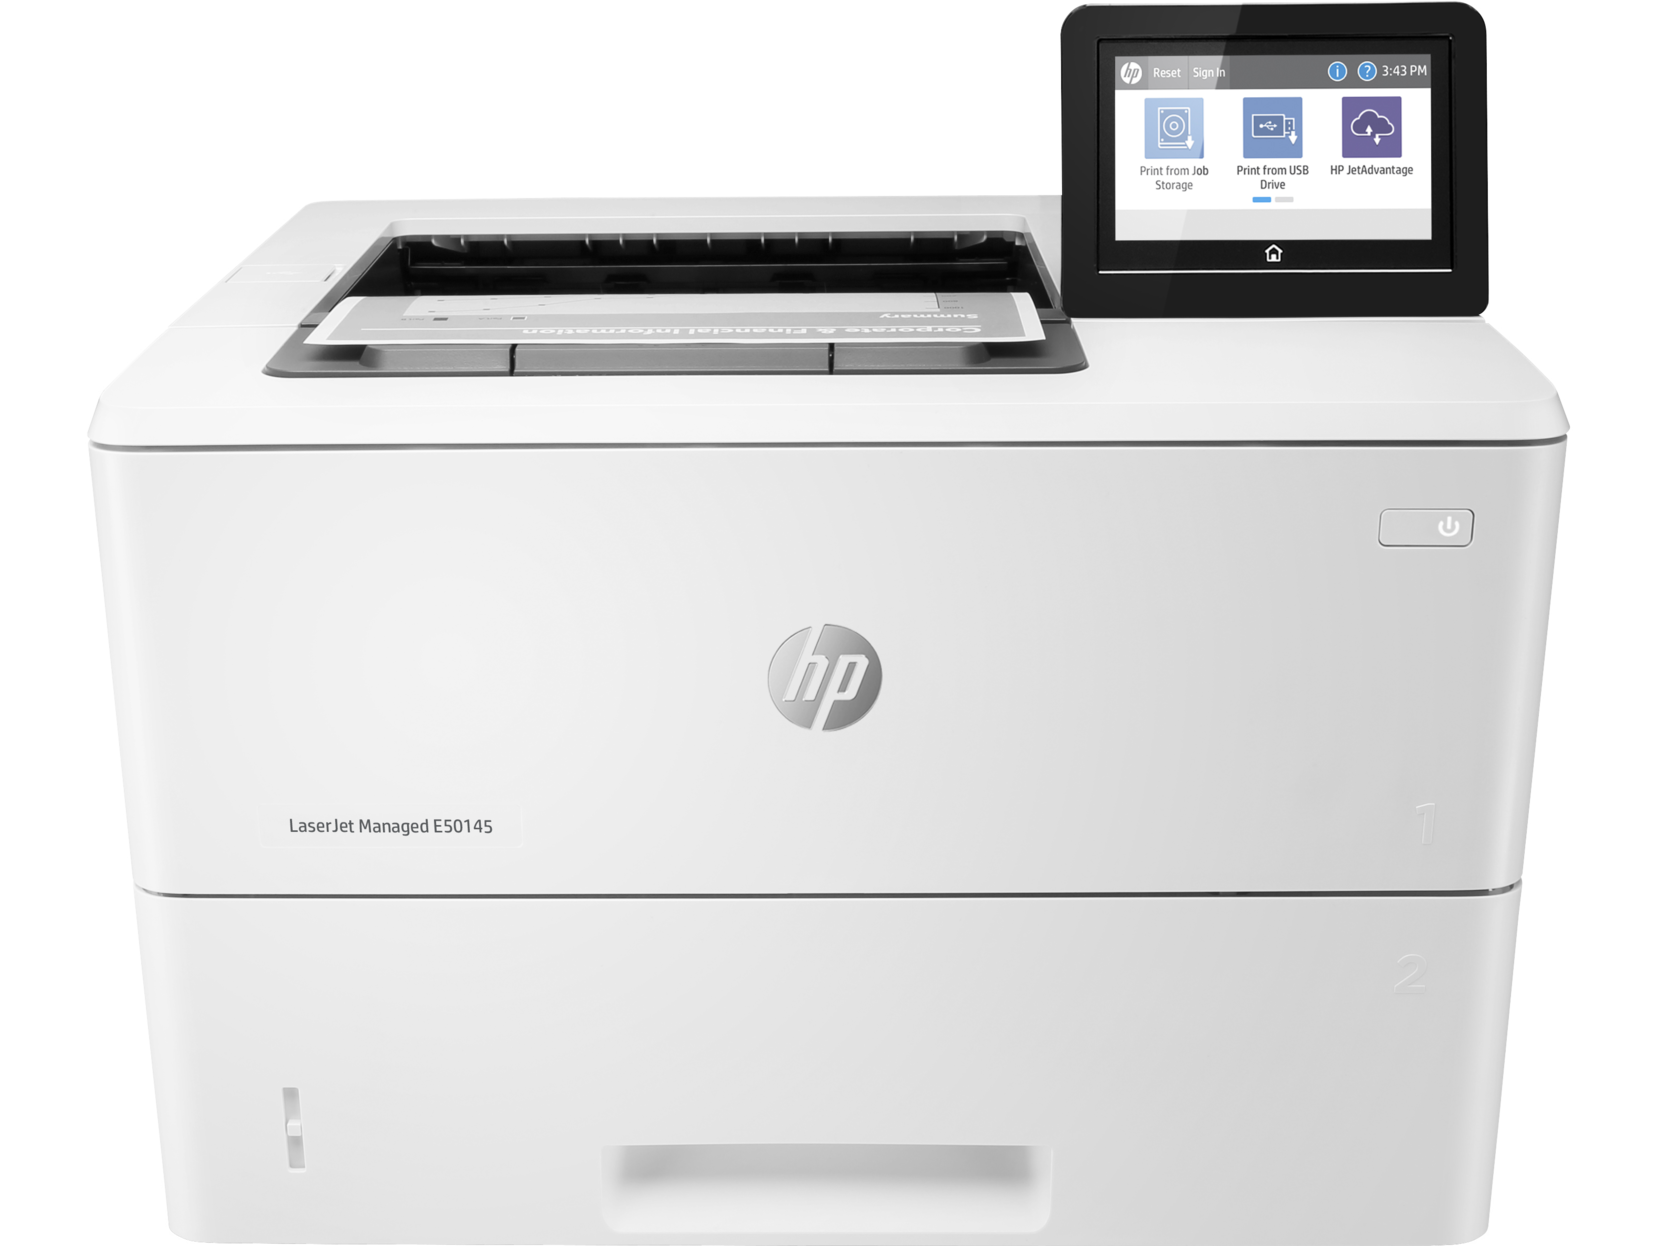 Máy in HP LaserJet Managed E50145DN Print,  Scan,  Copy,  Fax,  Duplex,  Network,  Wifi,  Email